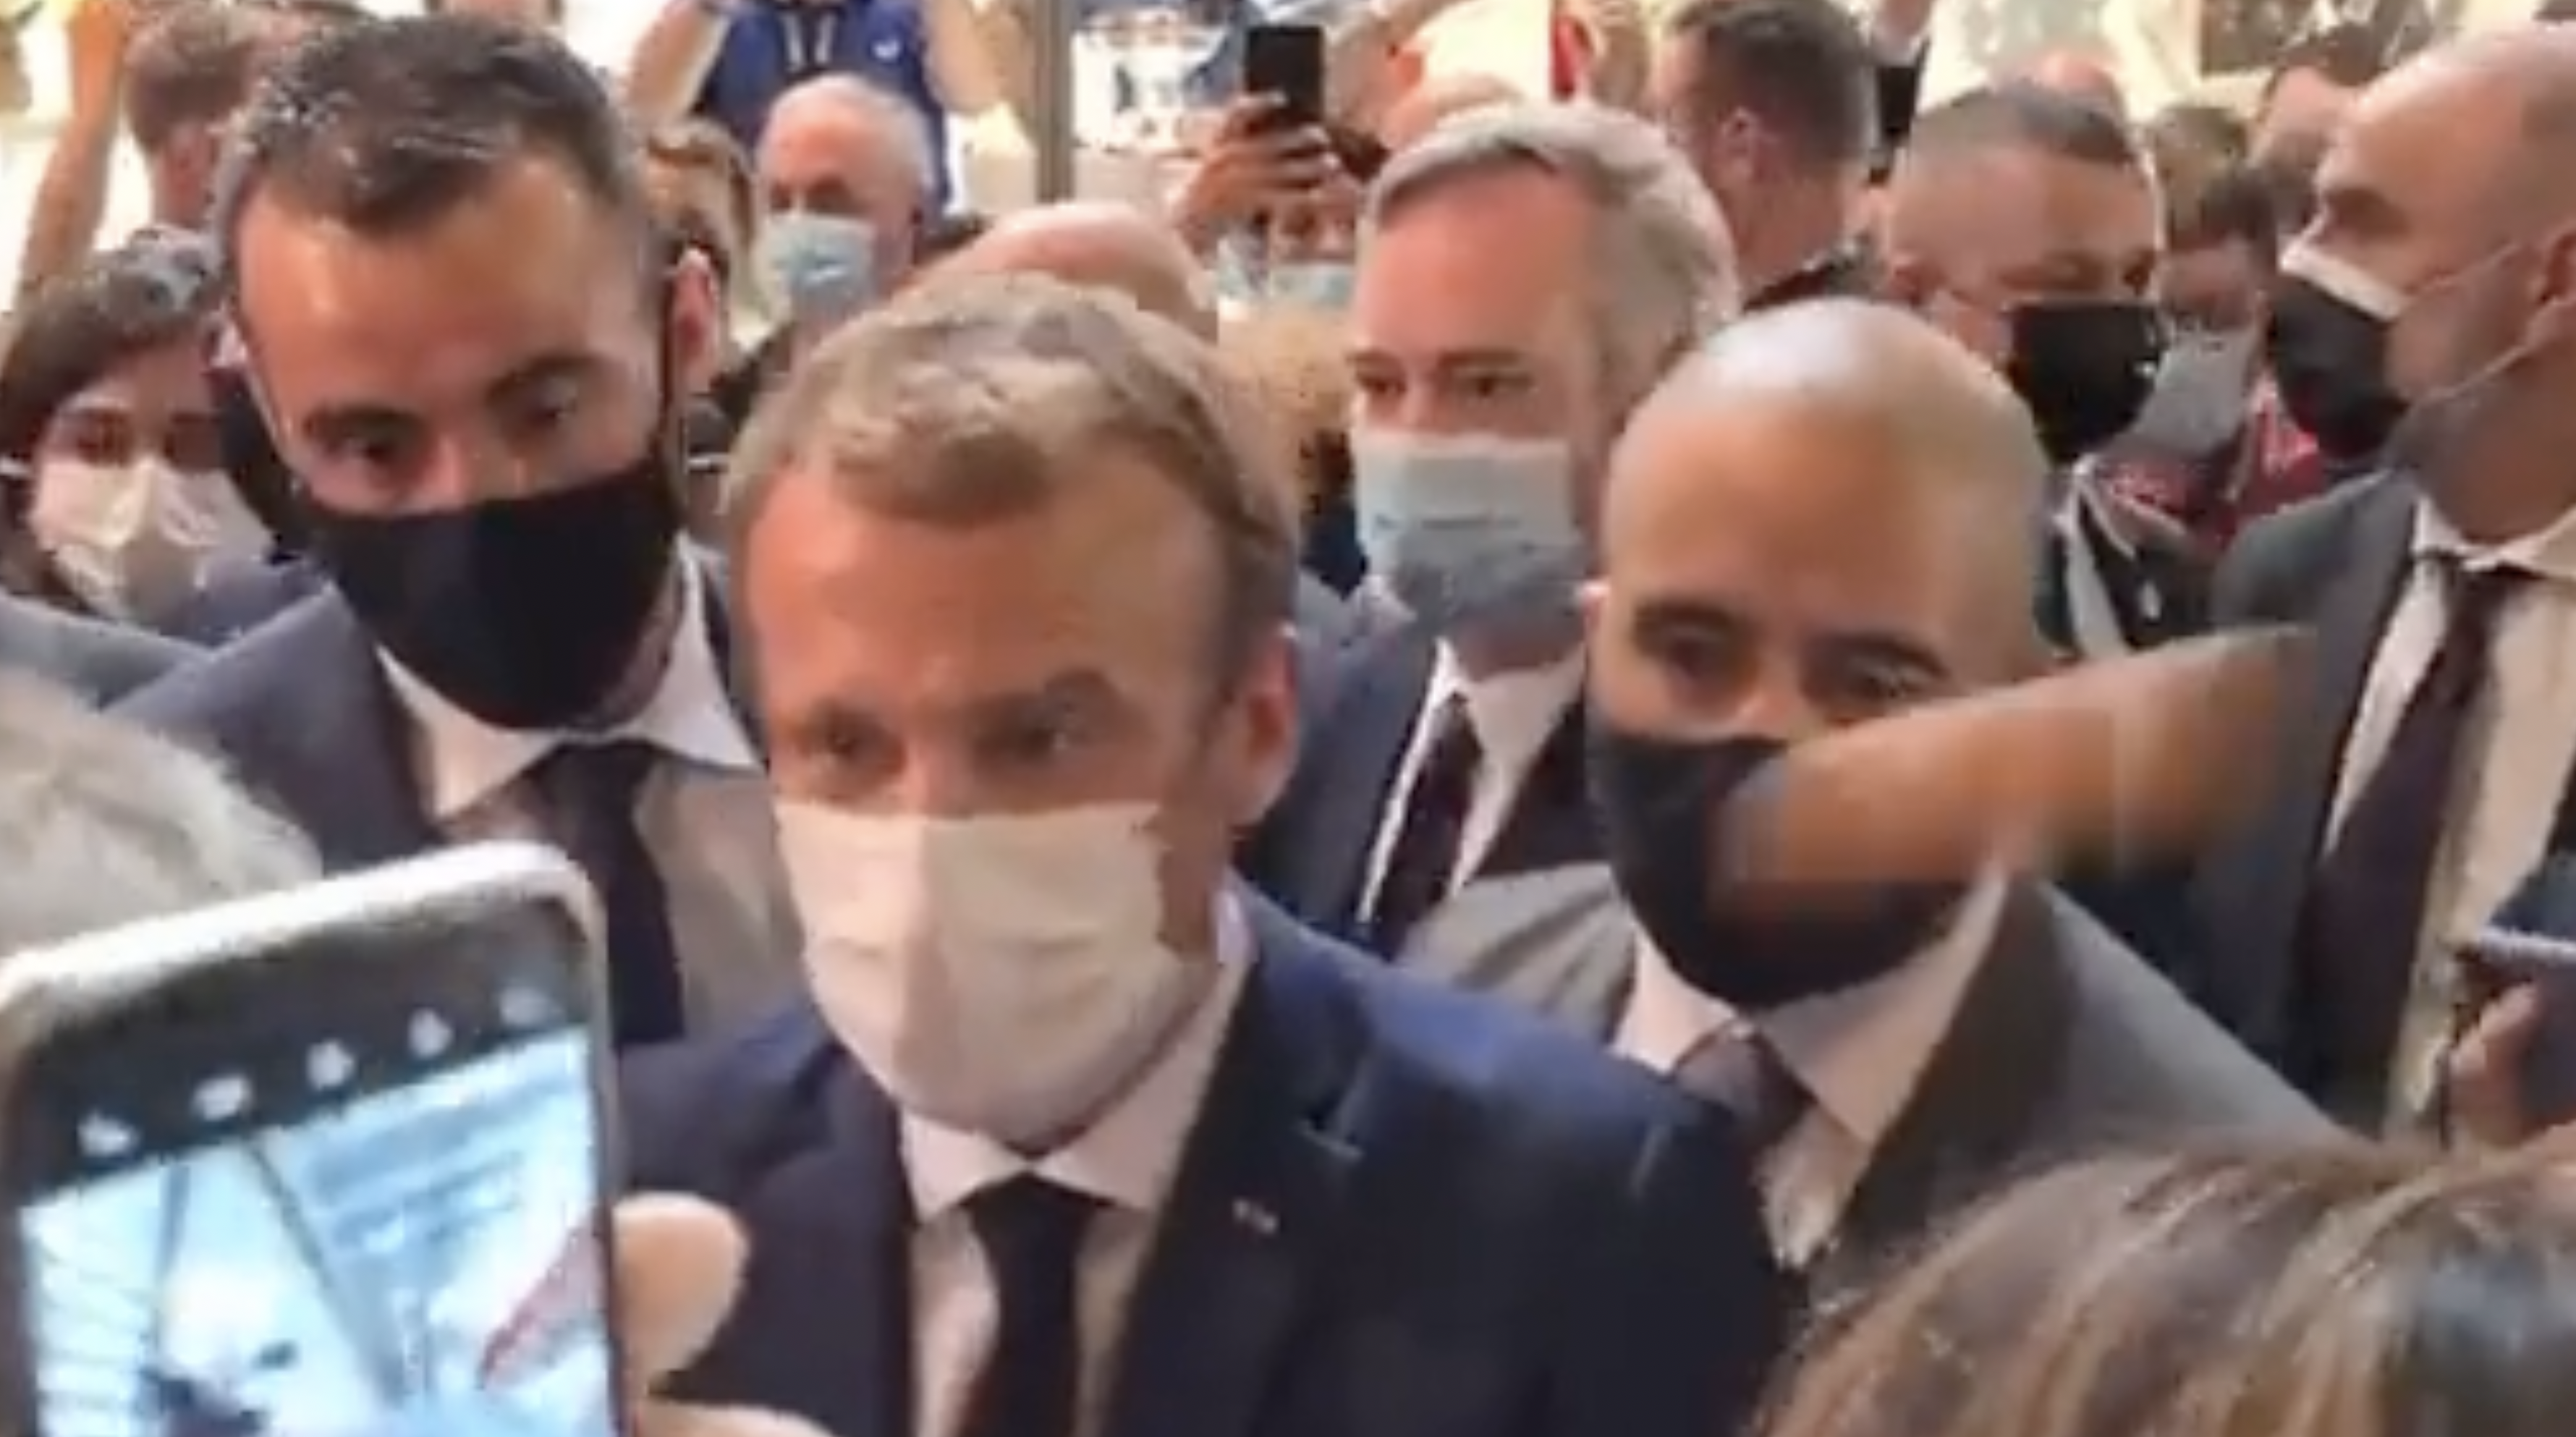 Emmanuel Macron pelted with egg in Lyon – here’s 12 other politicians who have suffered a similar fate